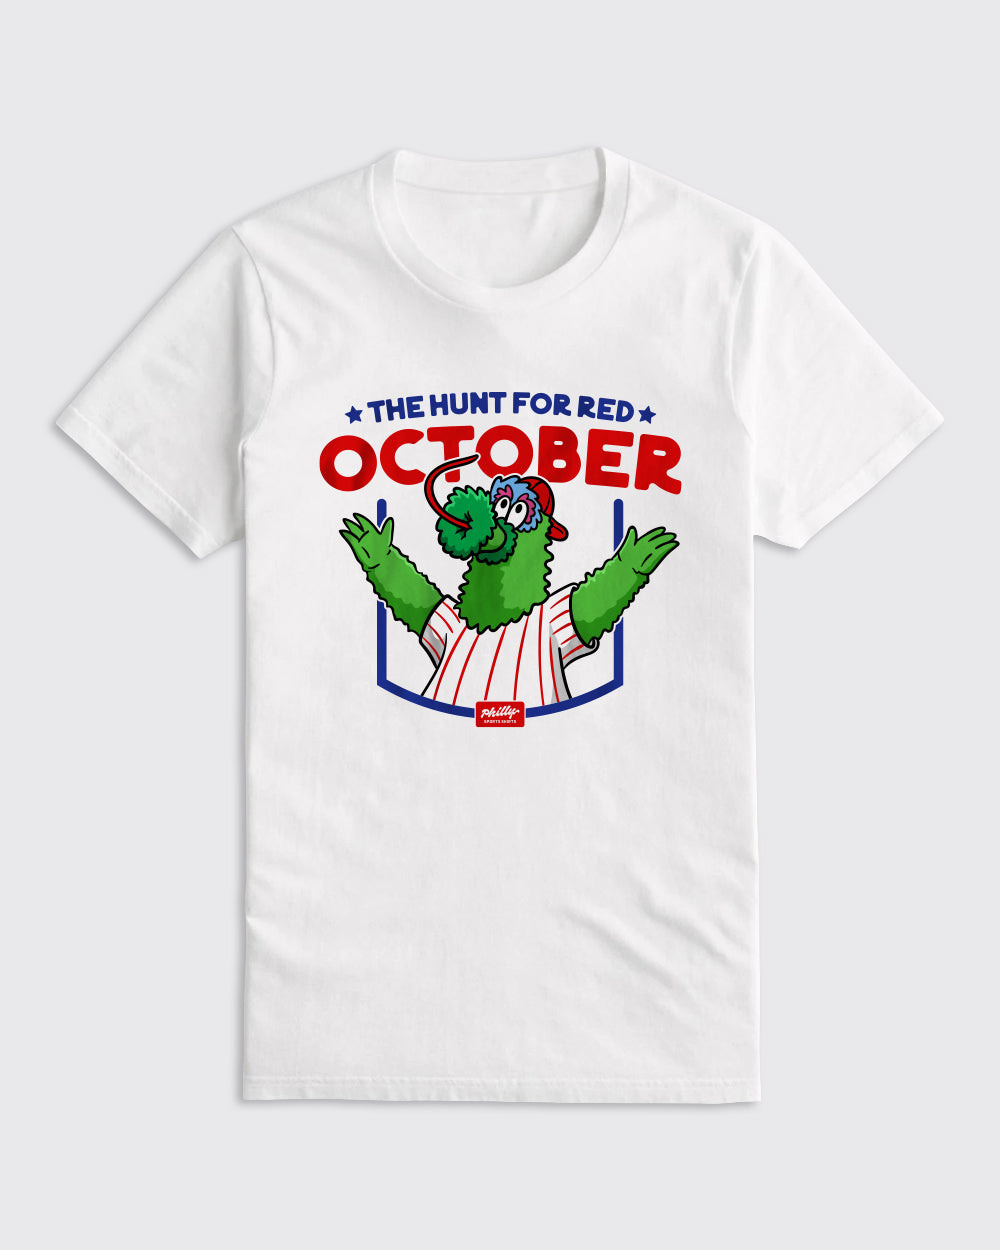 The Hunt for Red October Shirt - Phillies, T-Shirts - Philly Sports Shirts